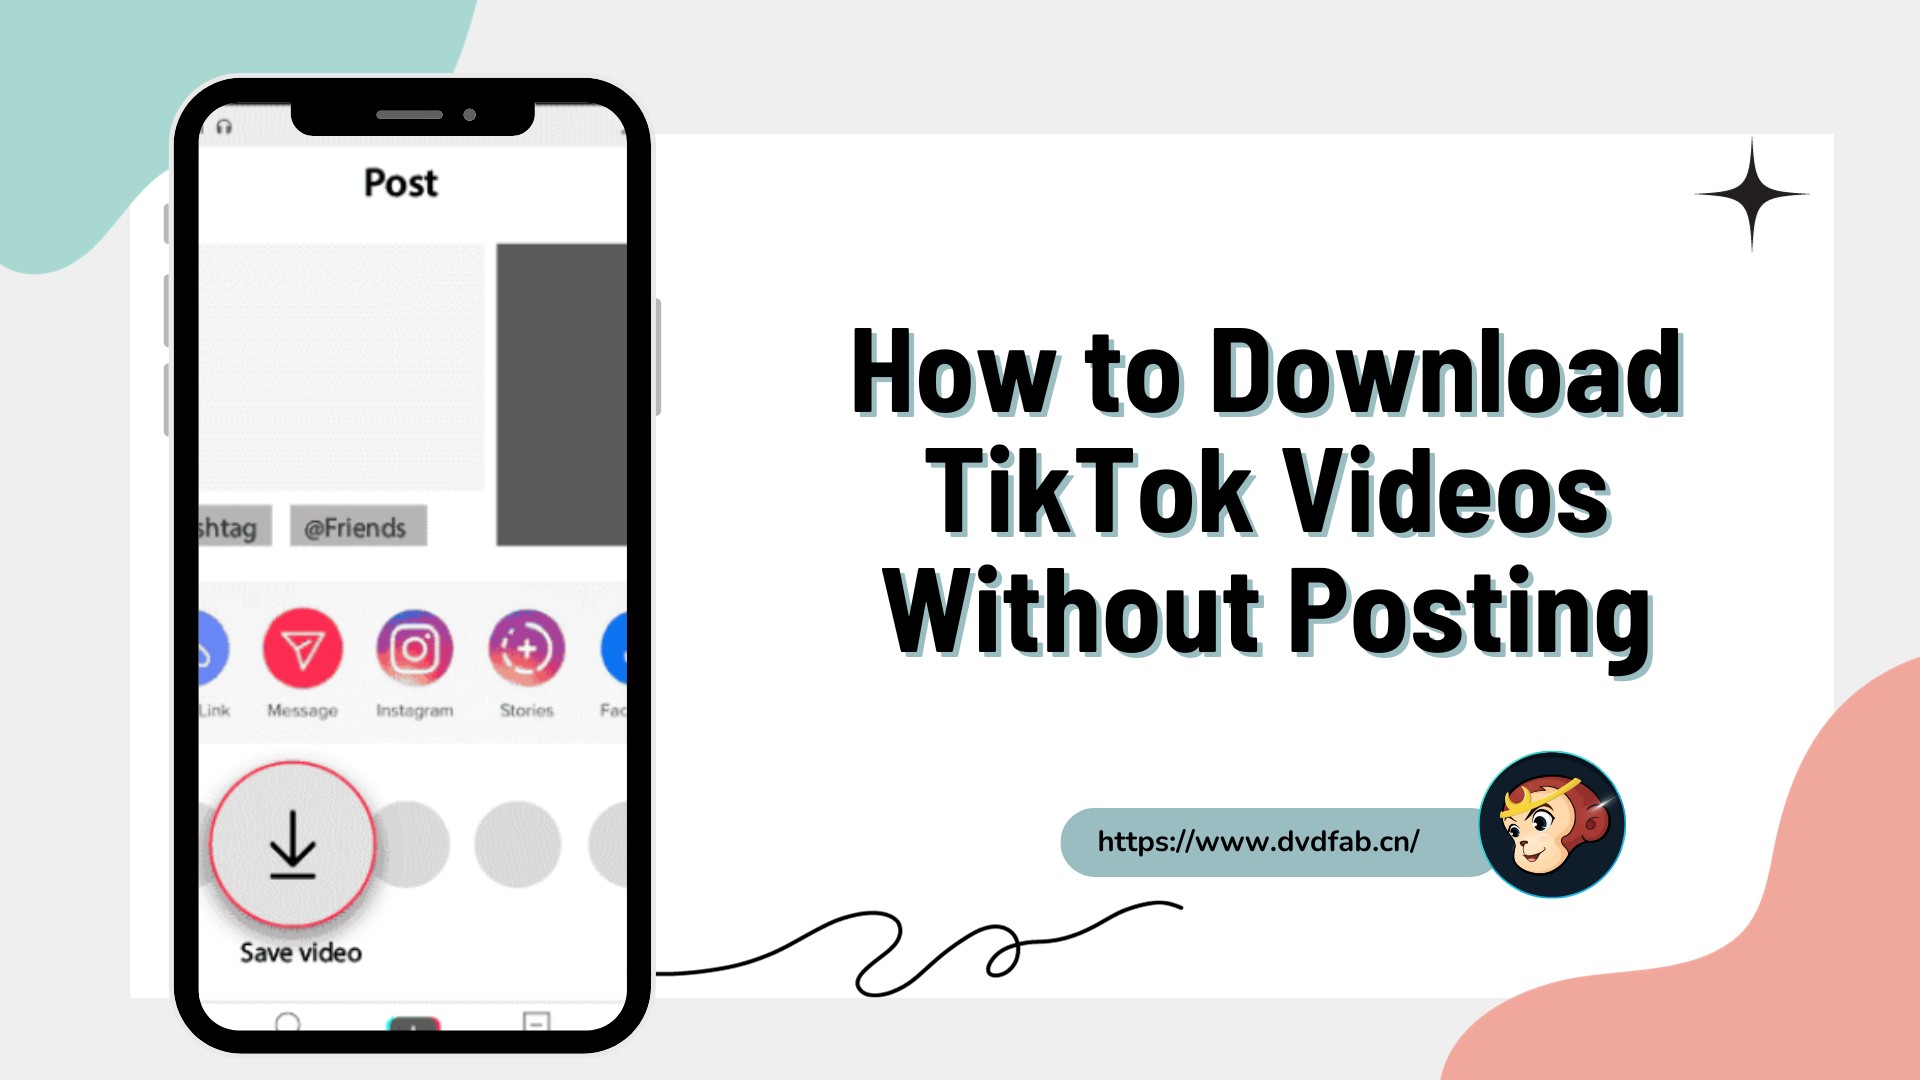 Steps & Tricks to Download TikTok Video Without Posting With Customization